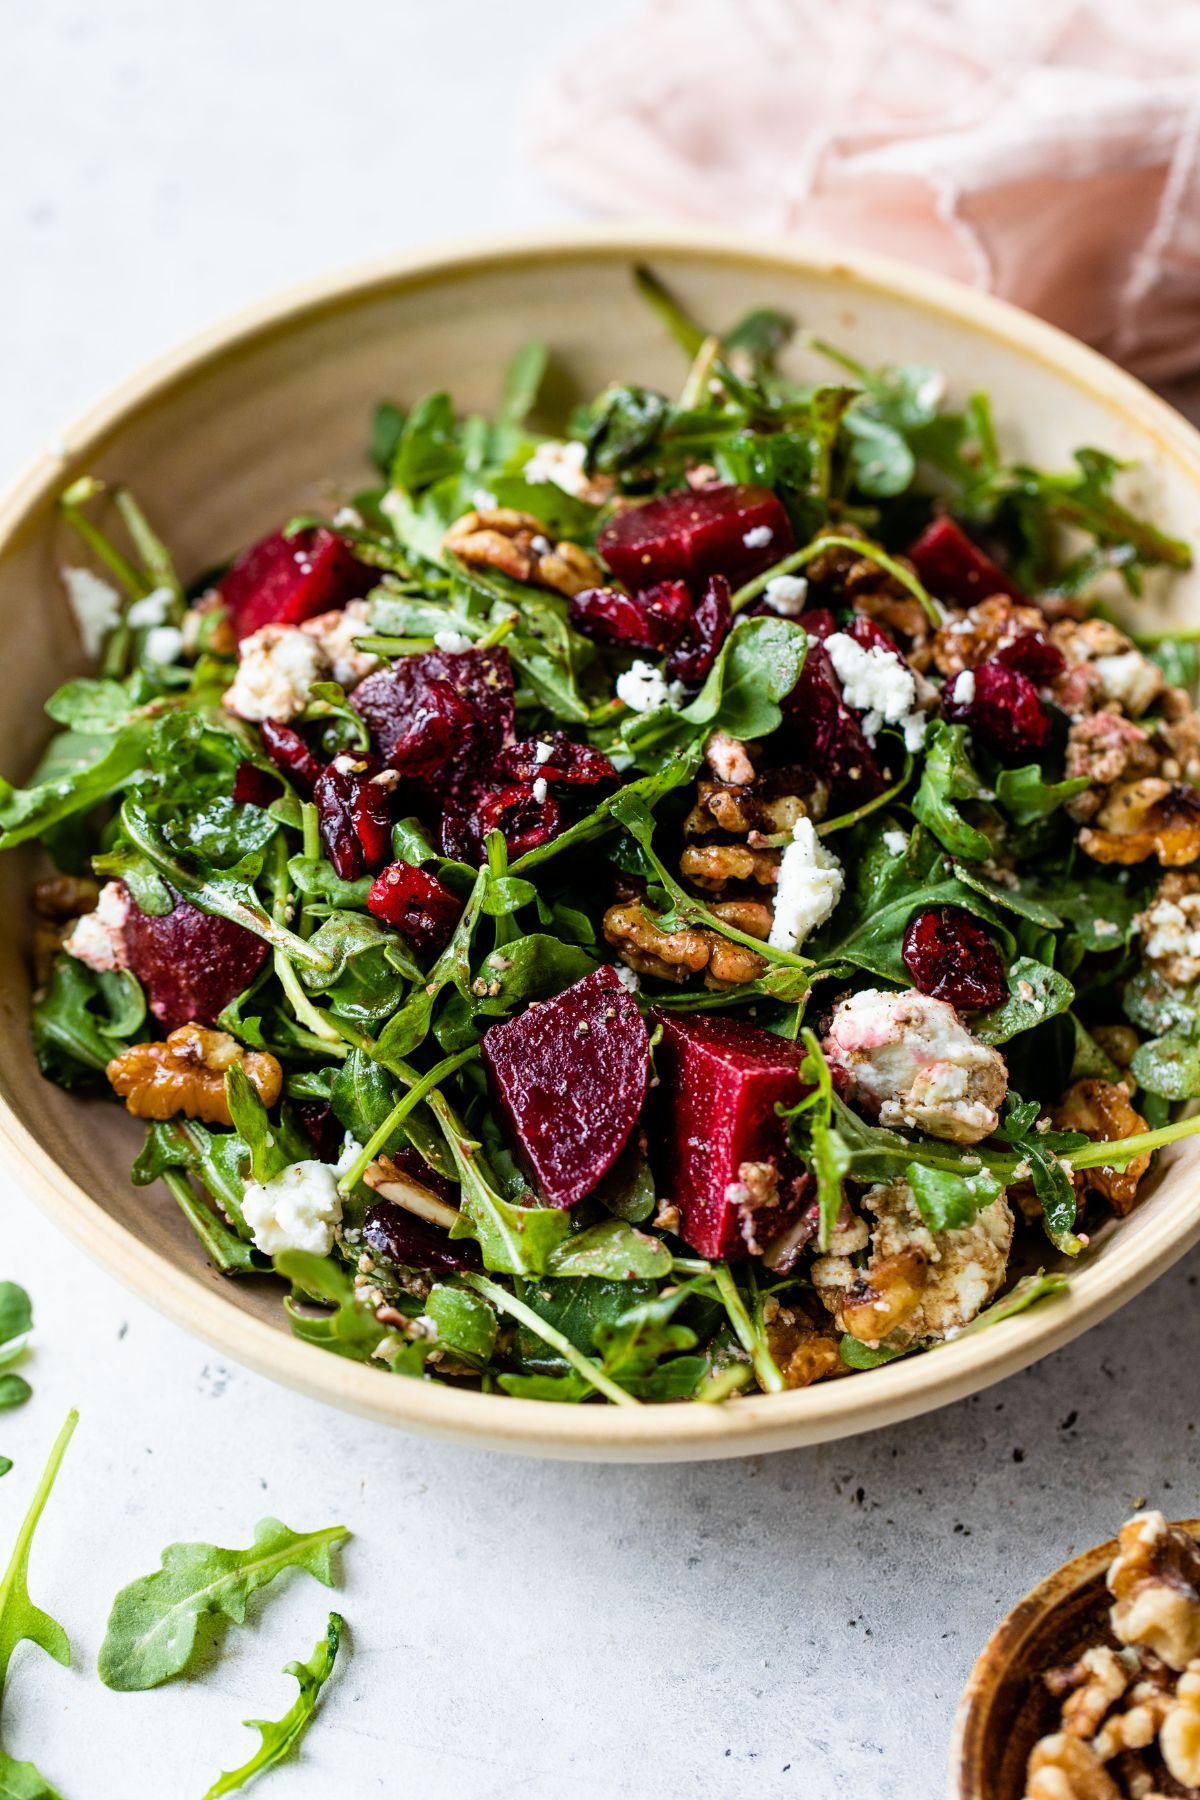 Arugula beet salad with goat cheese and walnuts in a bowl.